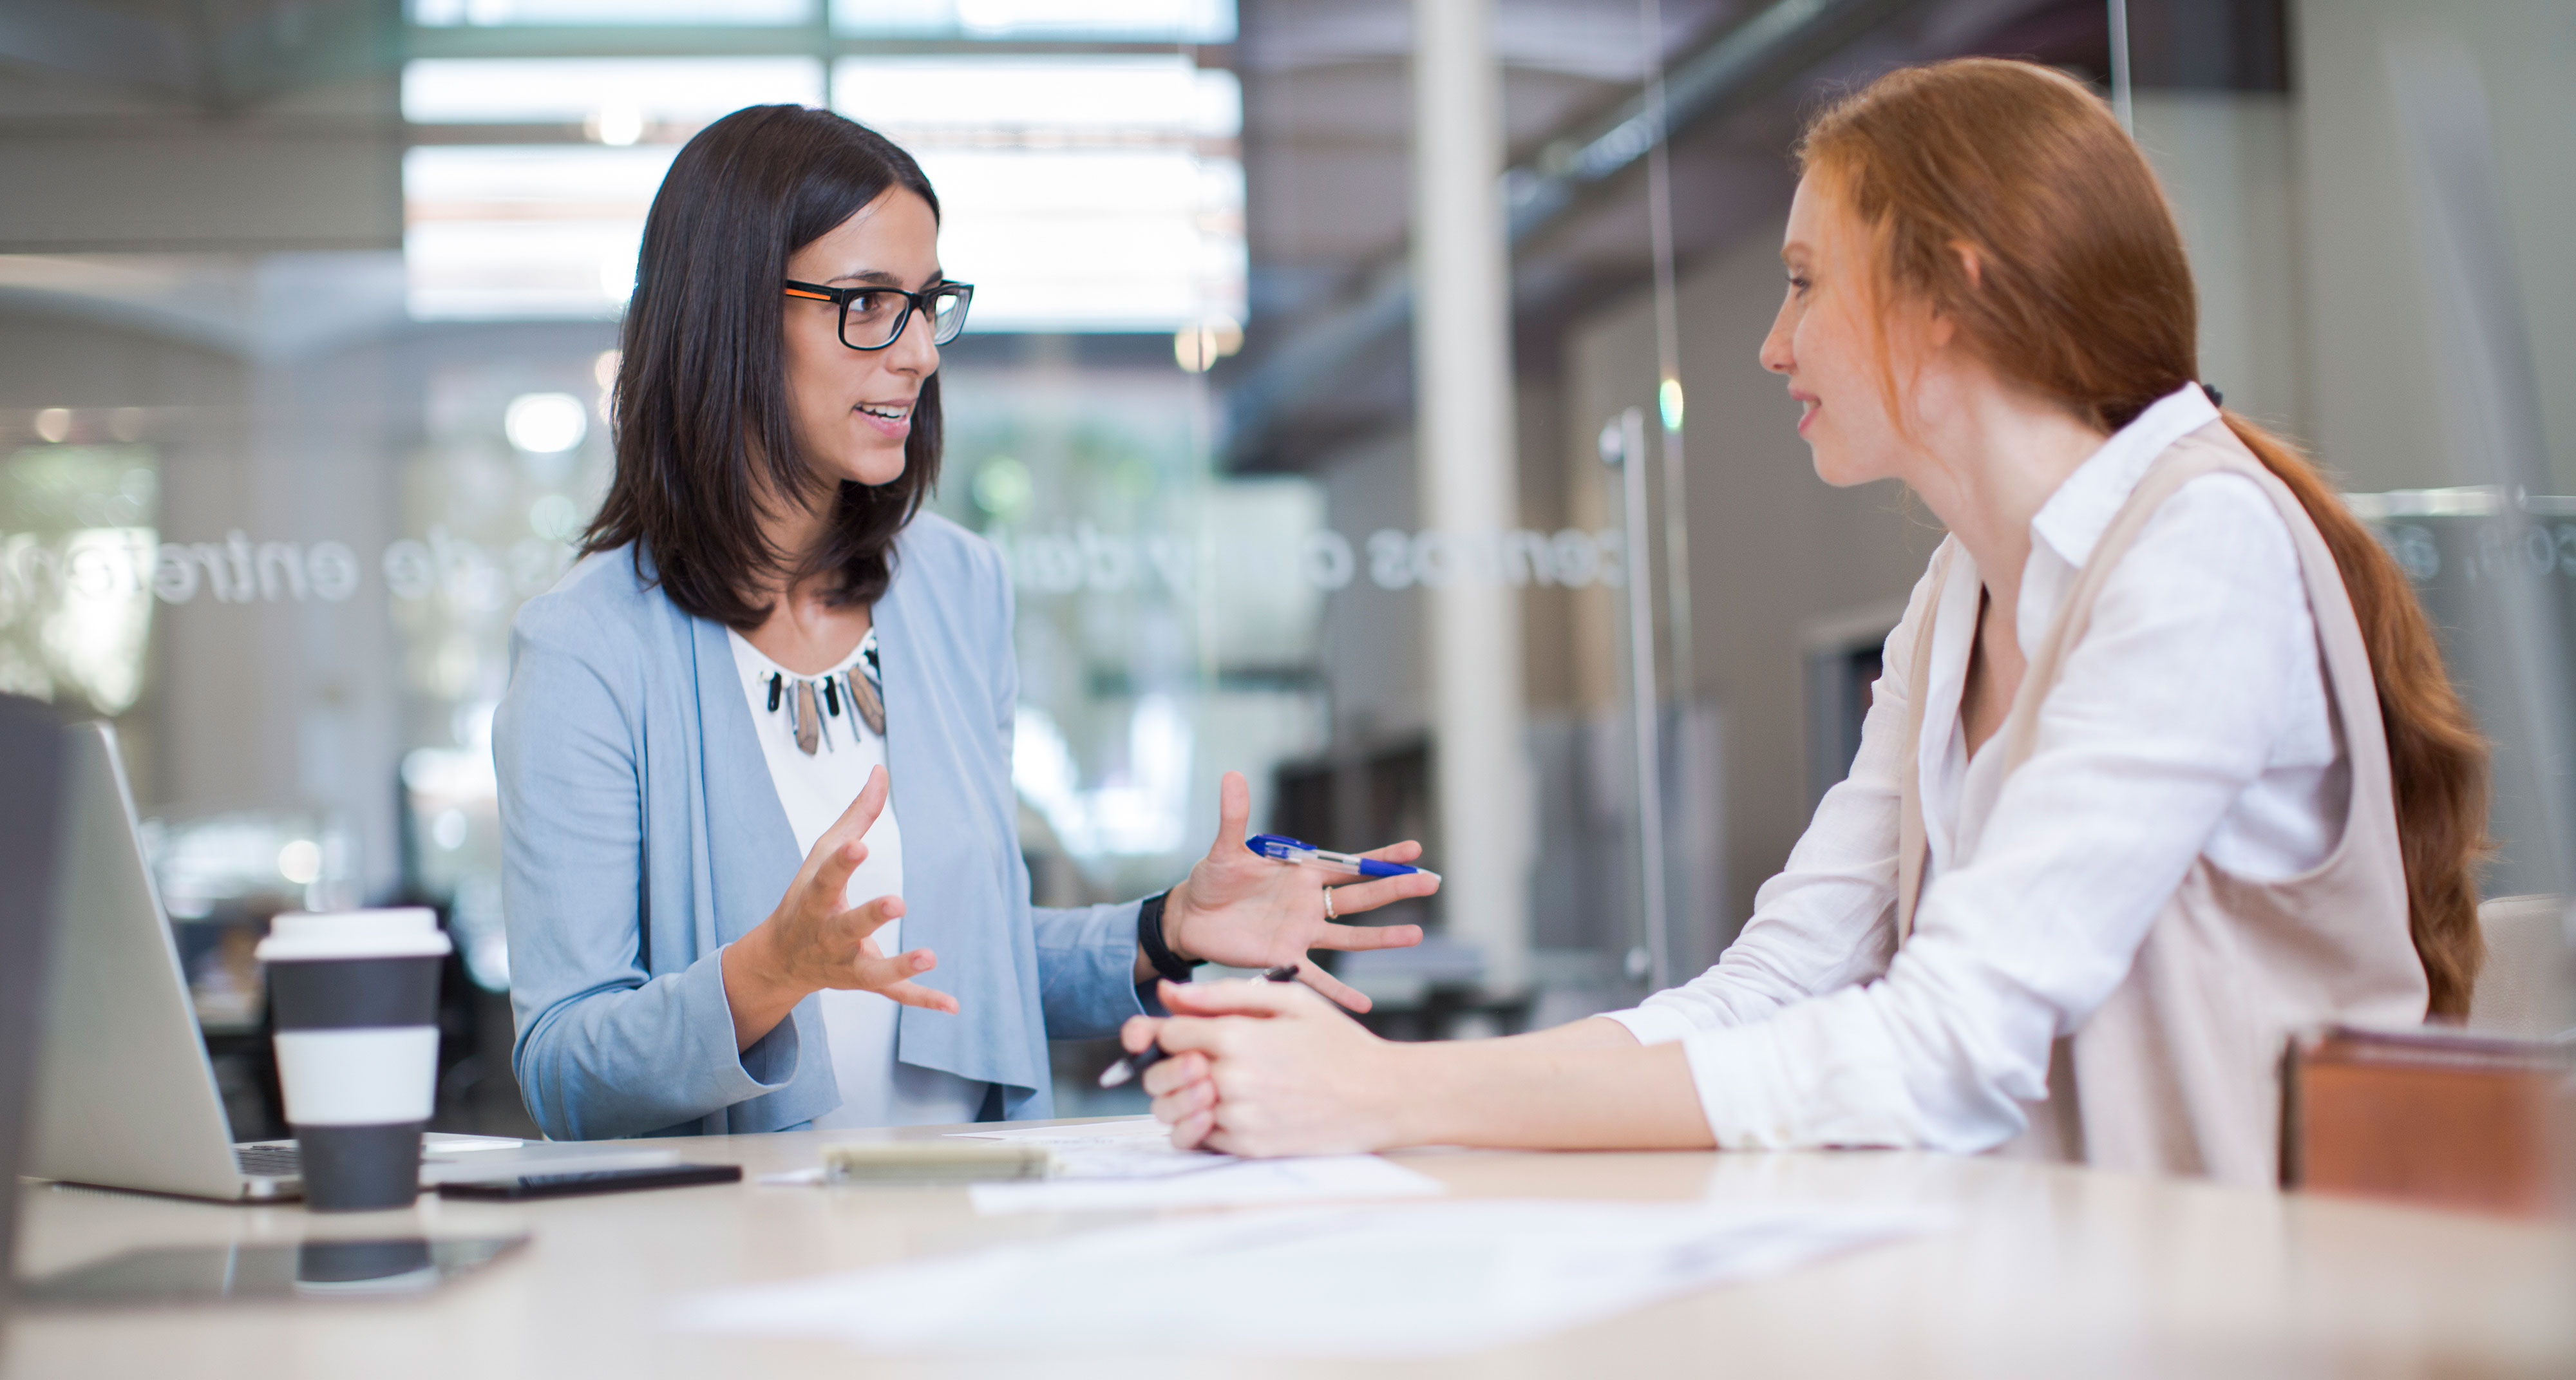 Two women talking in an office meeting room glass walls and door, white table, bright lighting